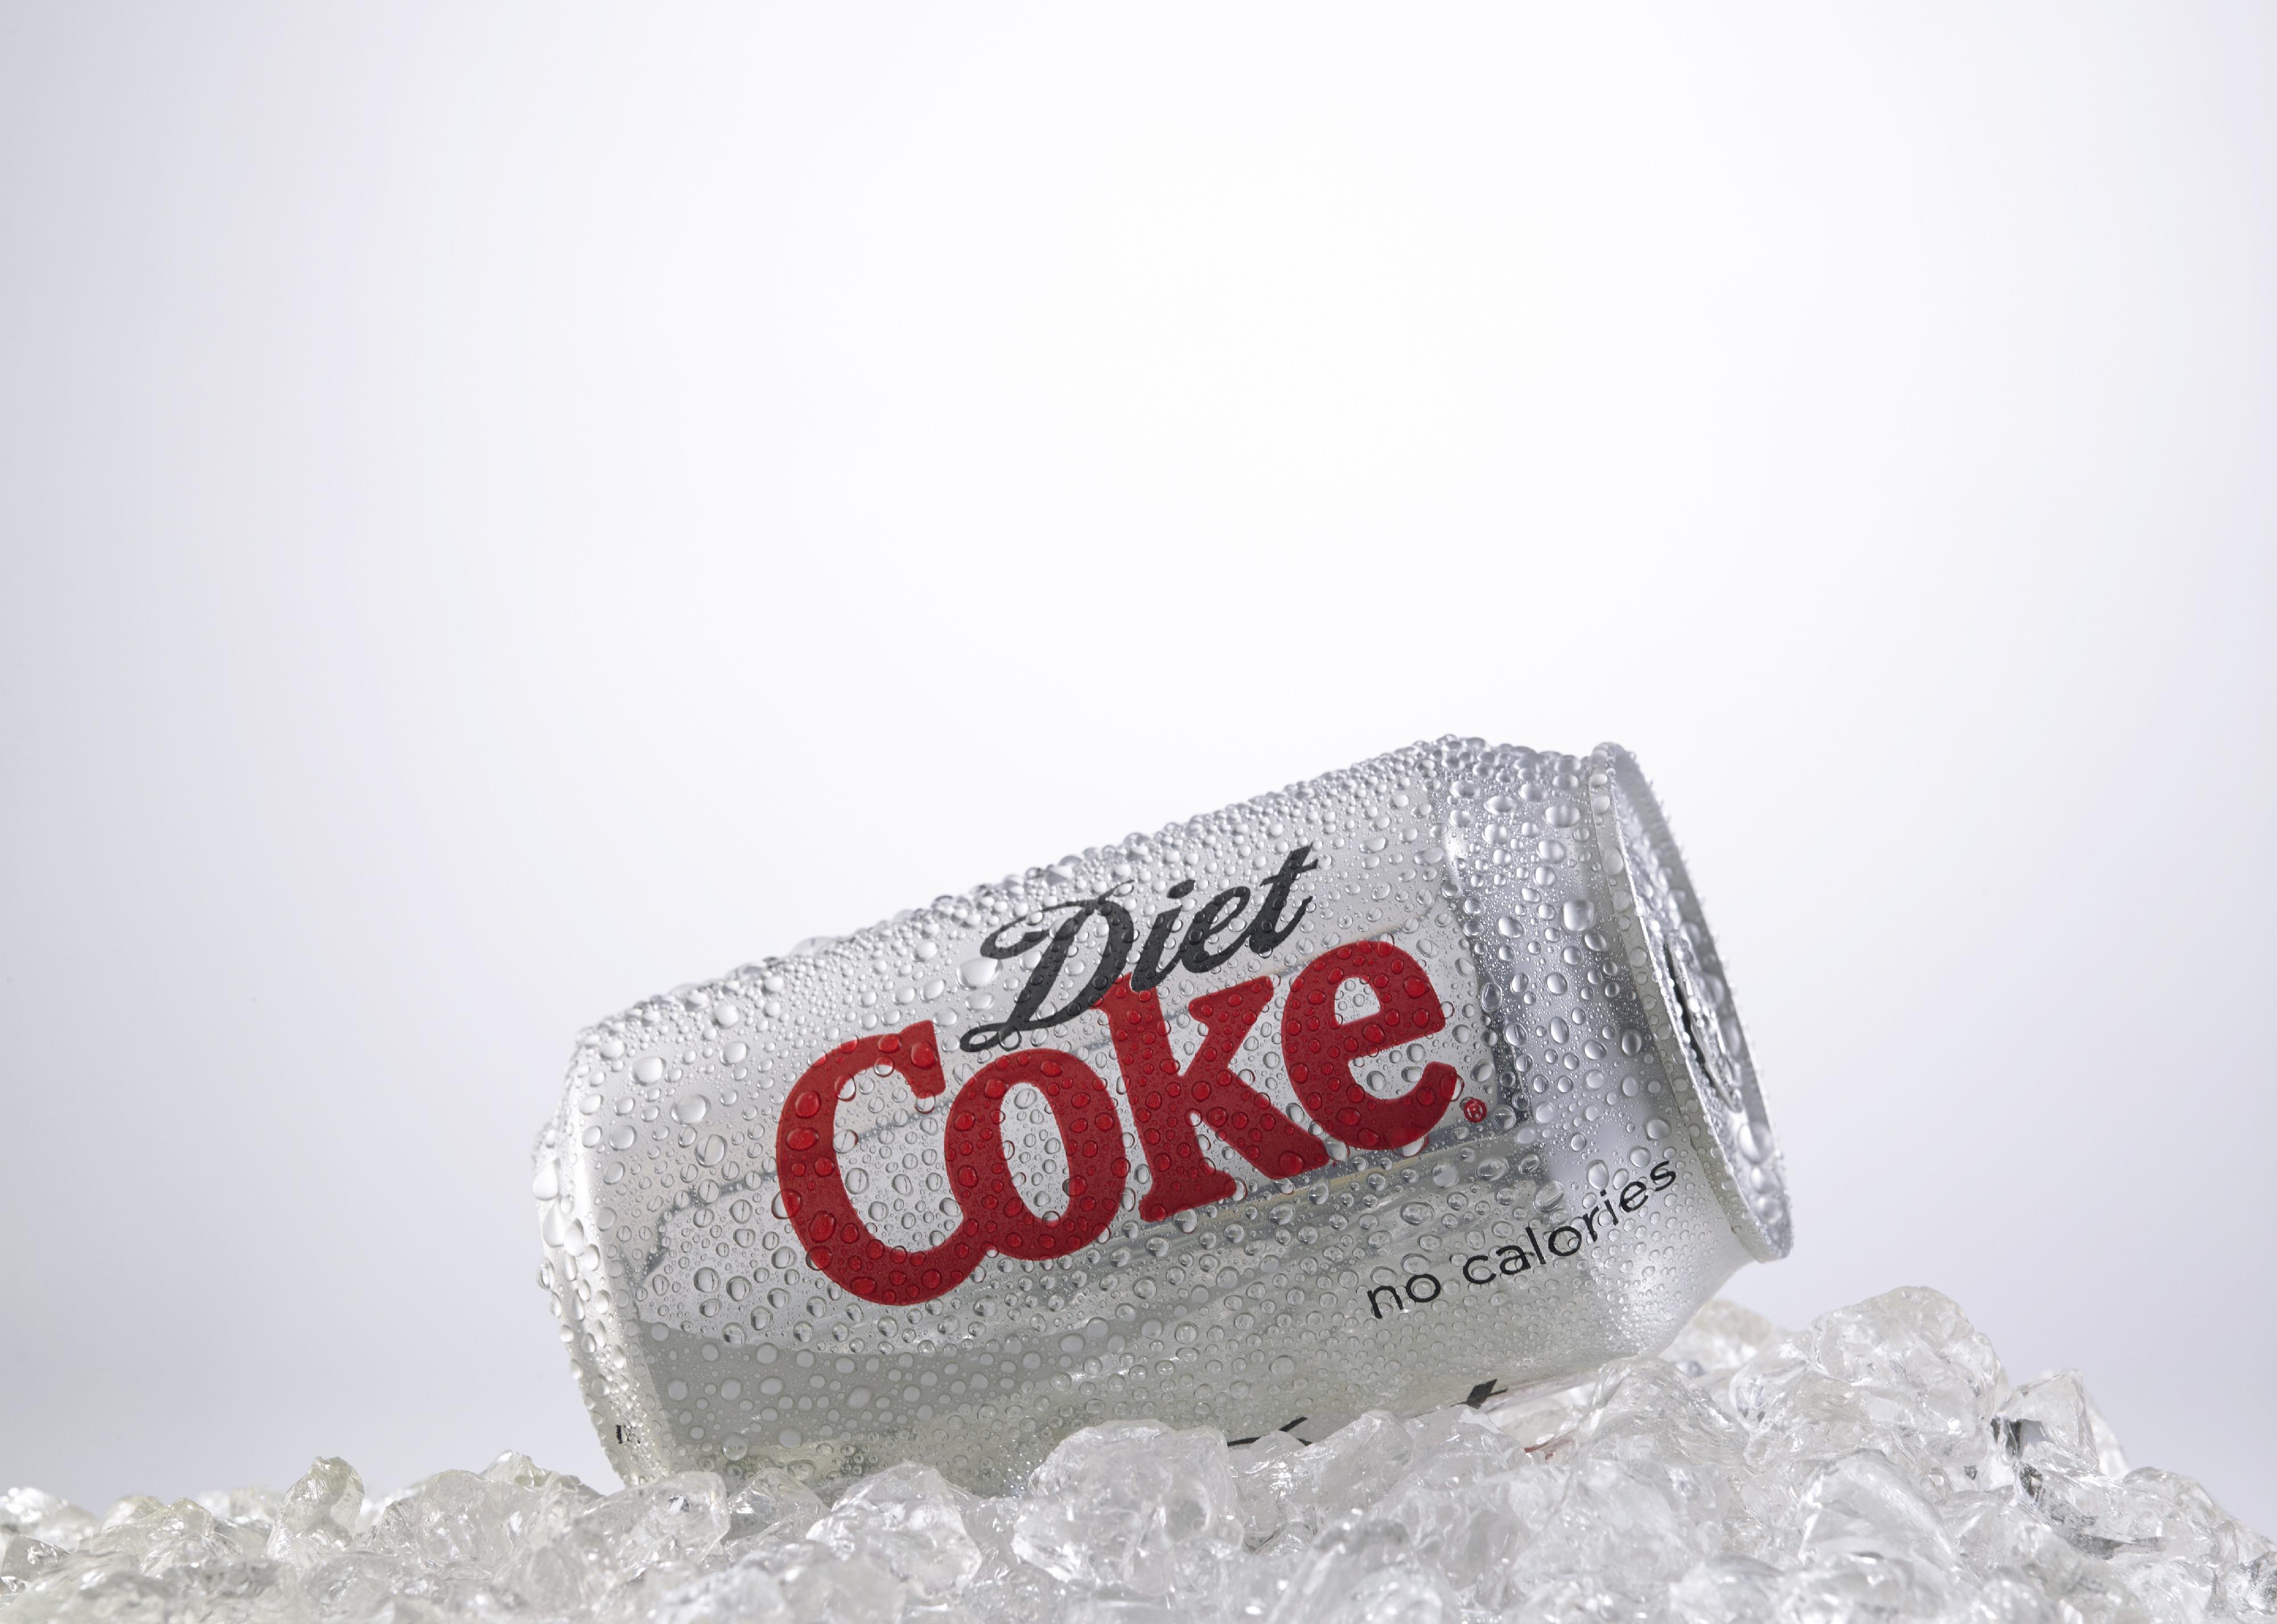 Can of Diet Coke on ice.